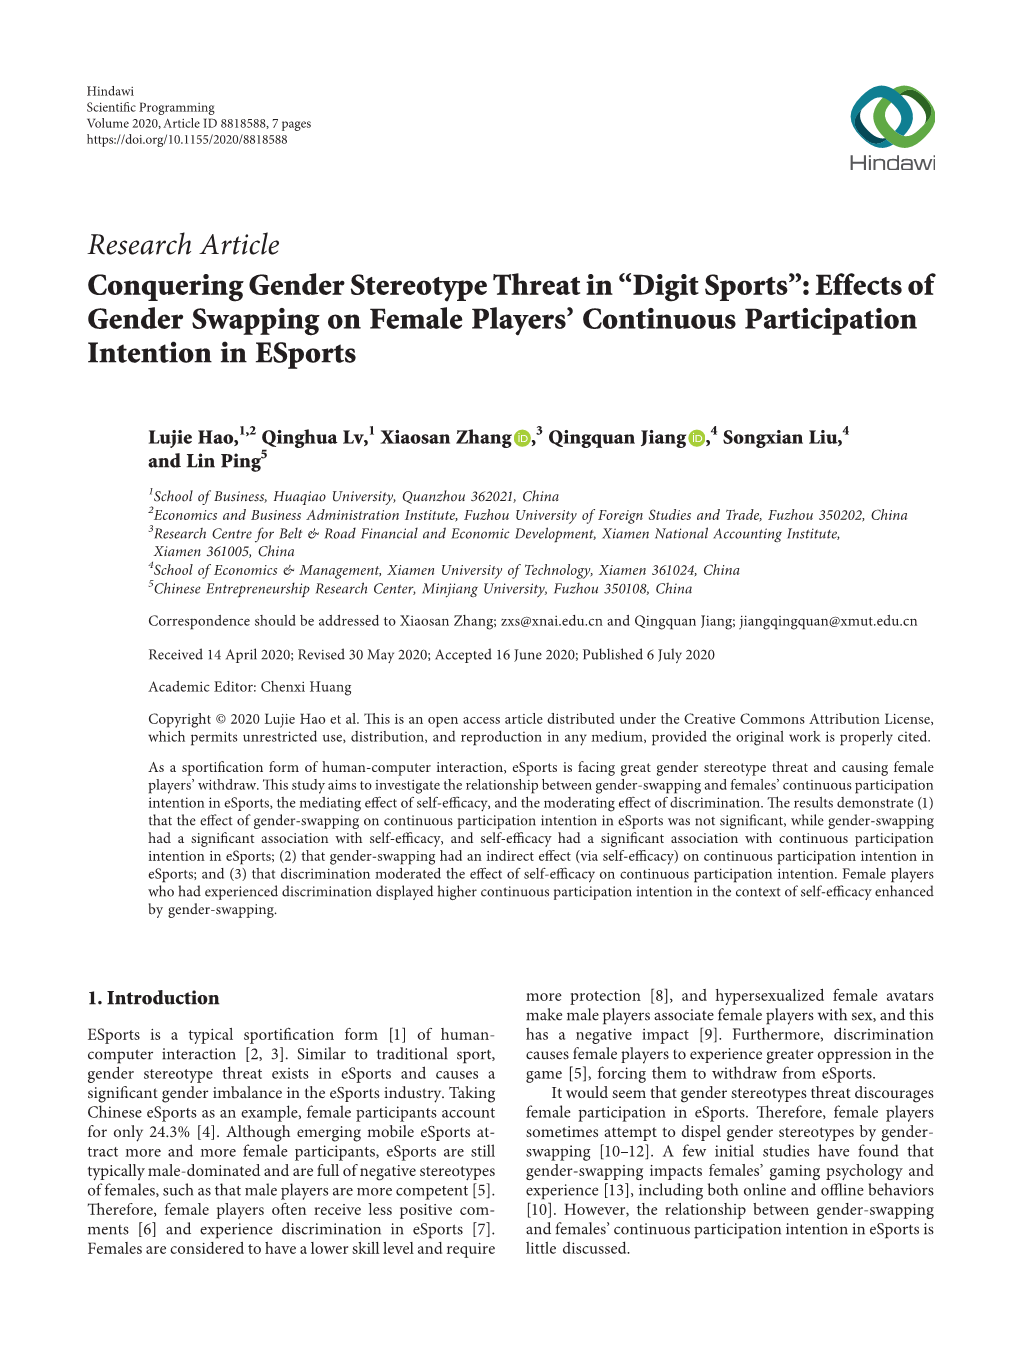 Conquering Gender Stereotype Threat in “Digit Sports”: Effects of Gender Swapping on Female Players' Continuous Participation Intention in Esports